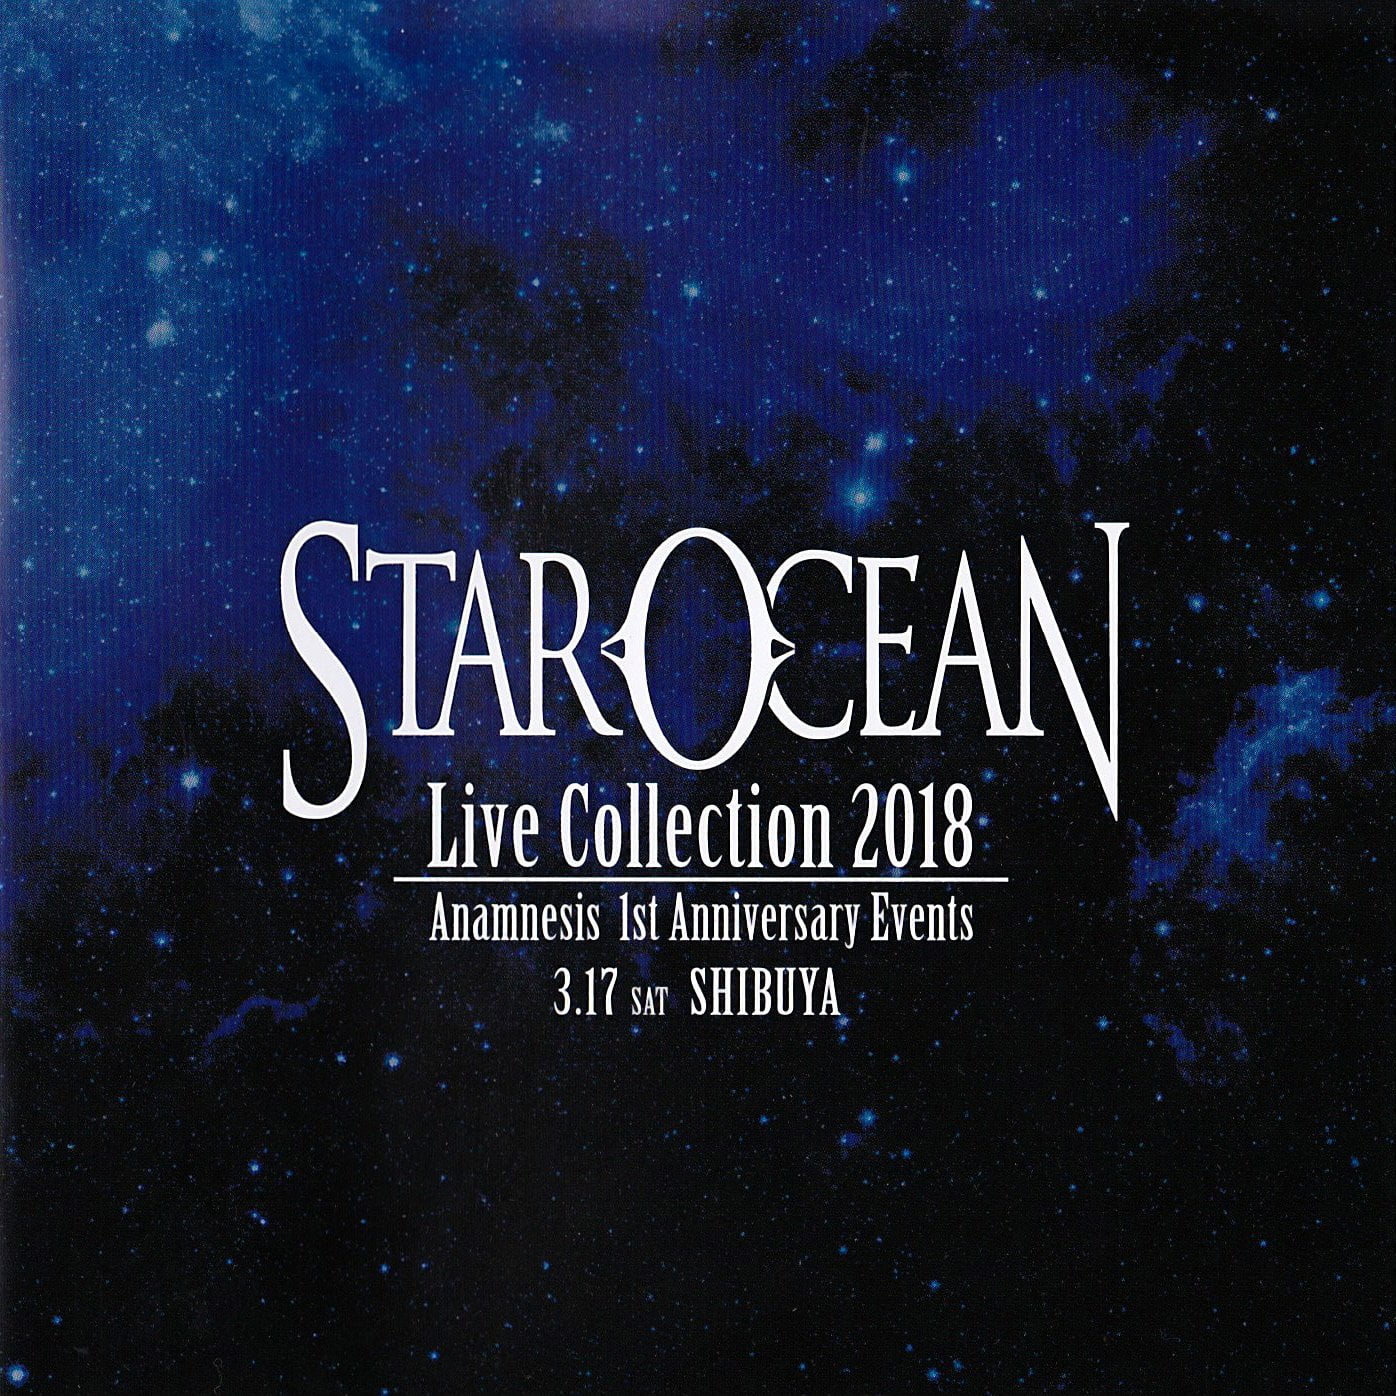 STAR OCEAN Live Collection 2018